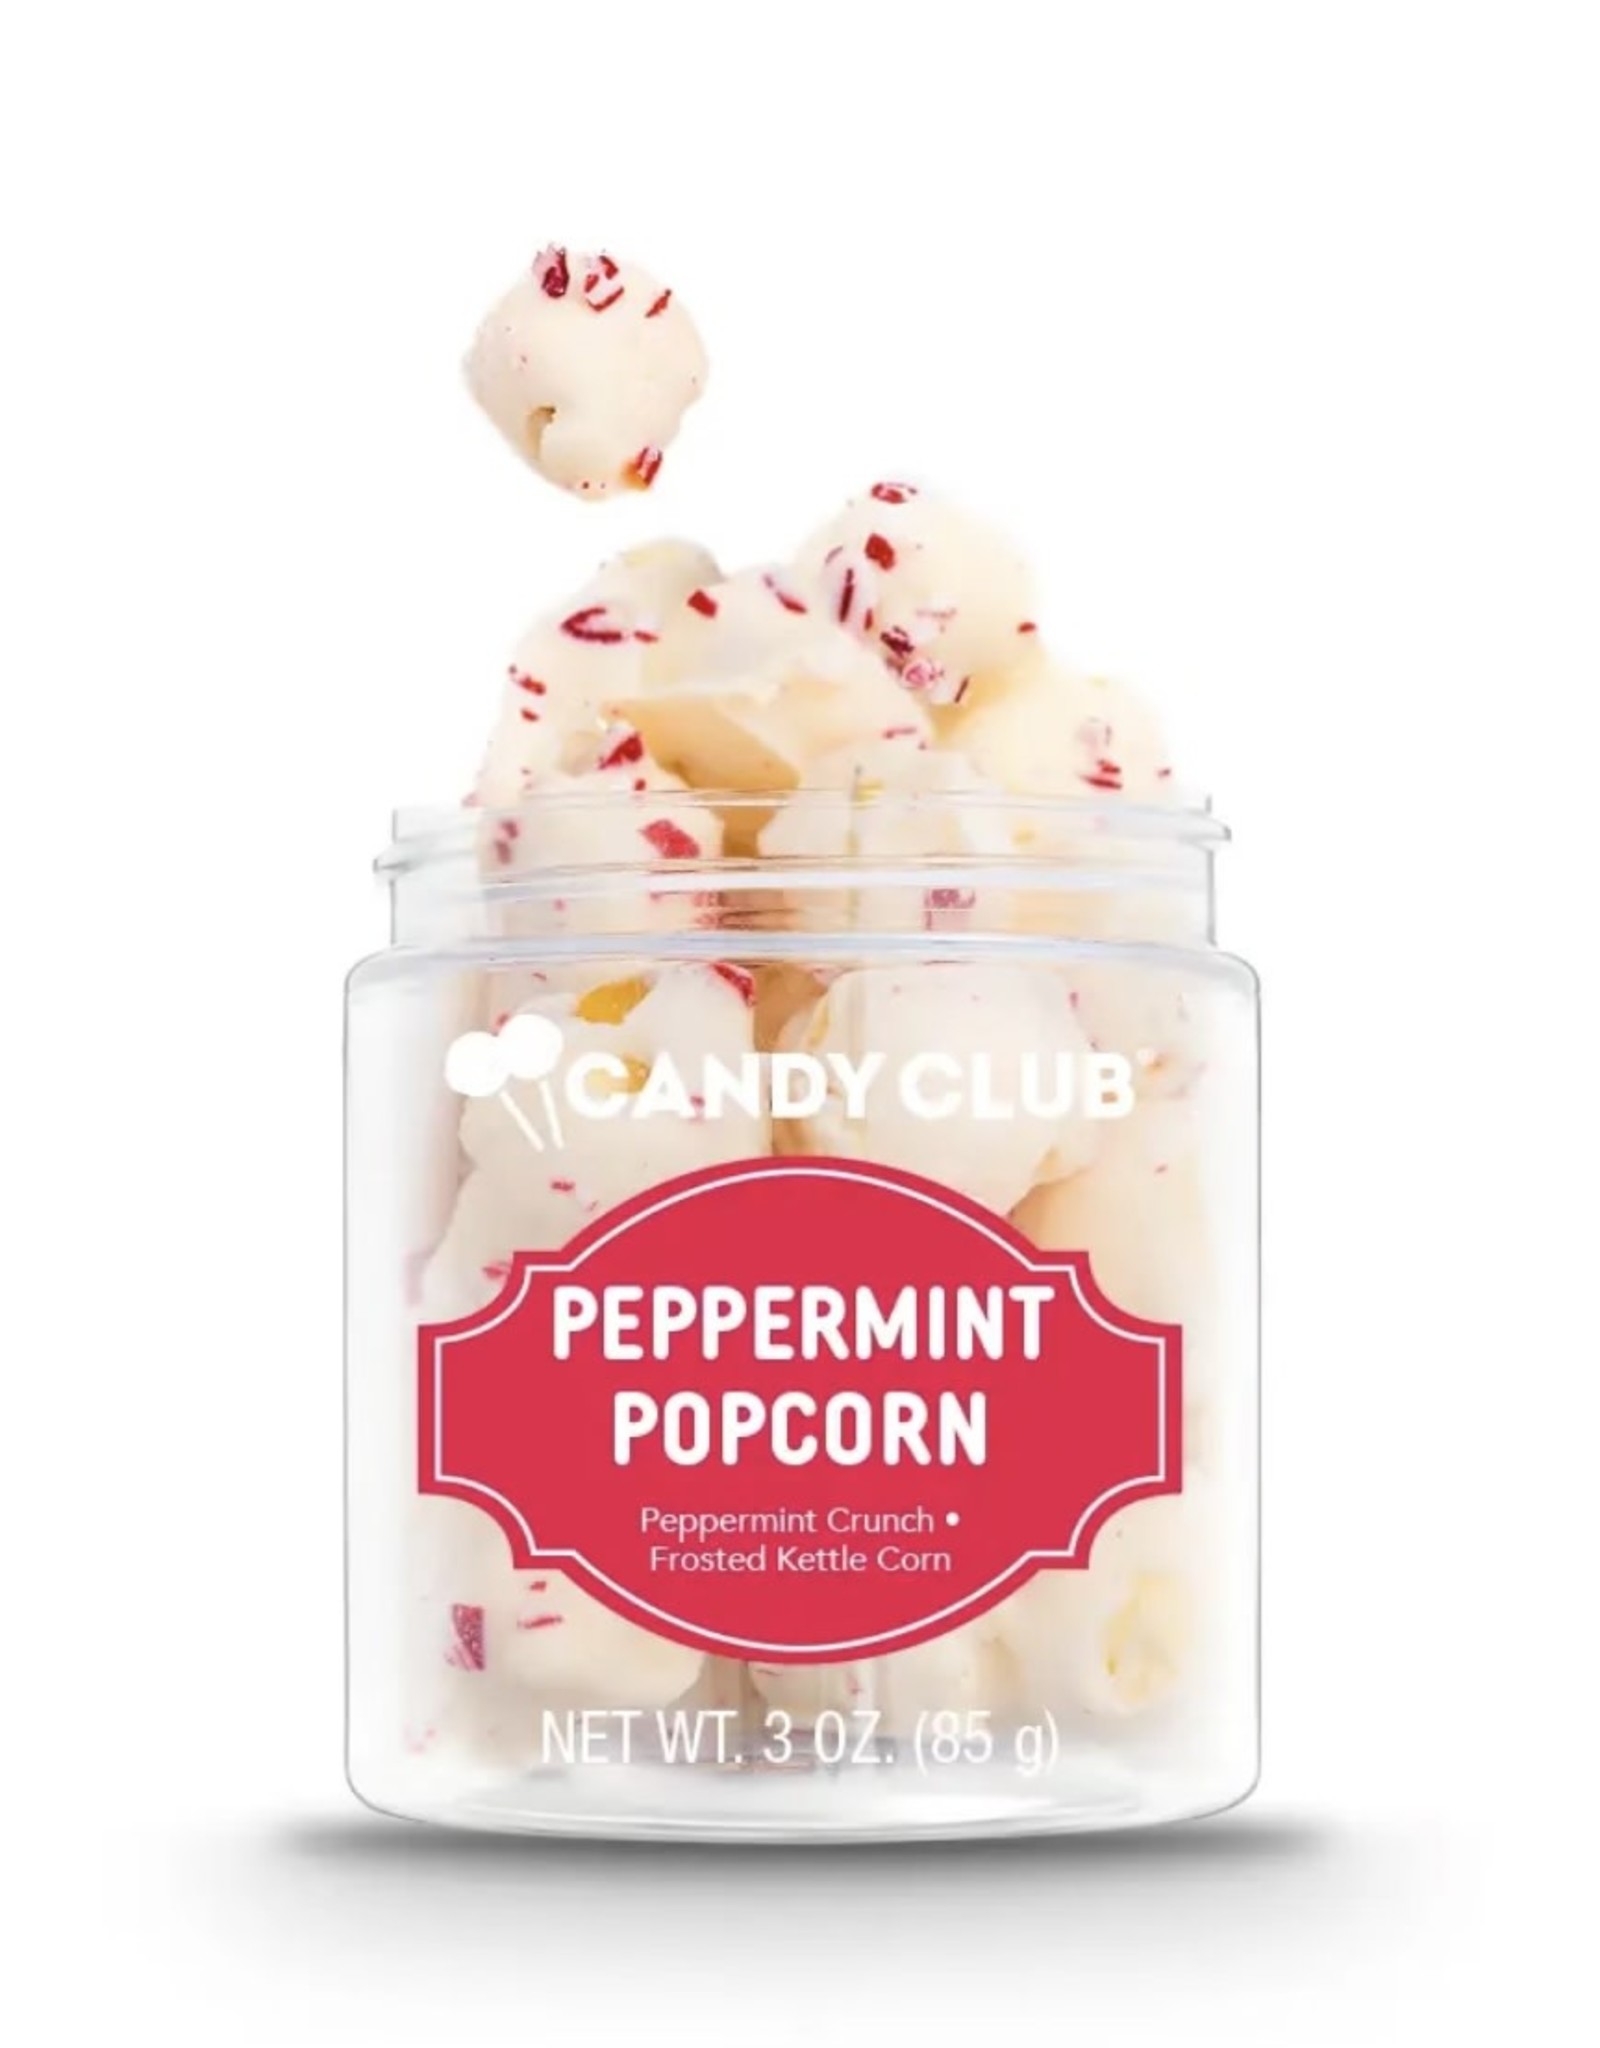 Candy Club Christmas Peppermint Popcorn